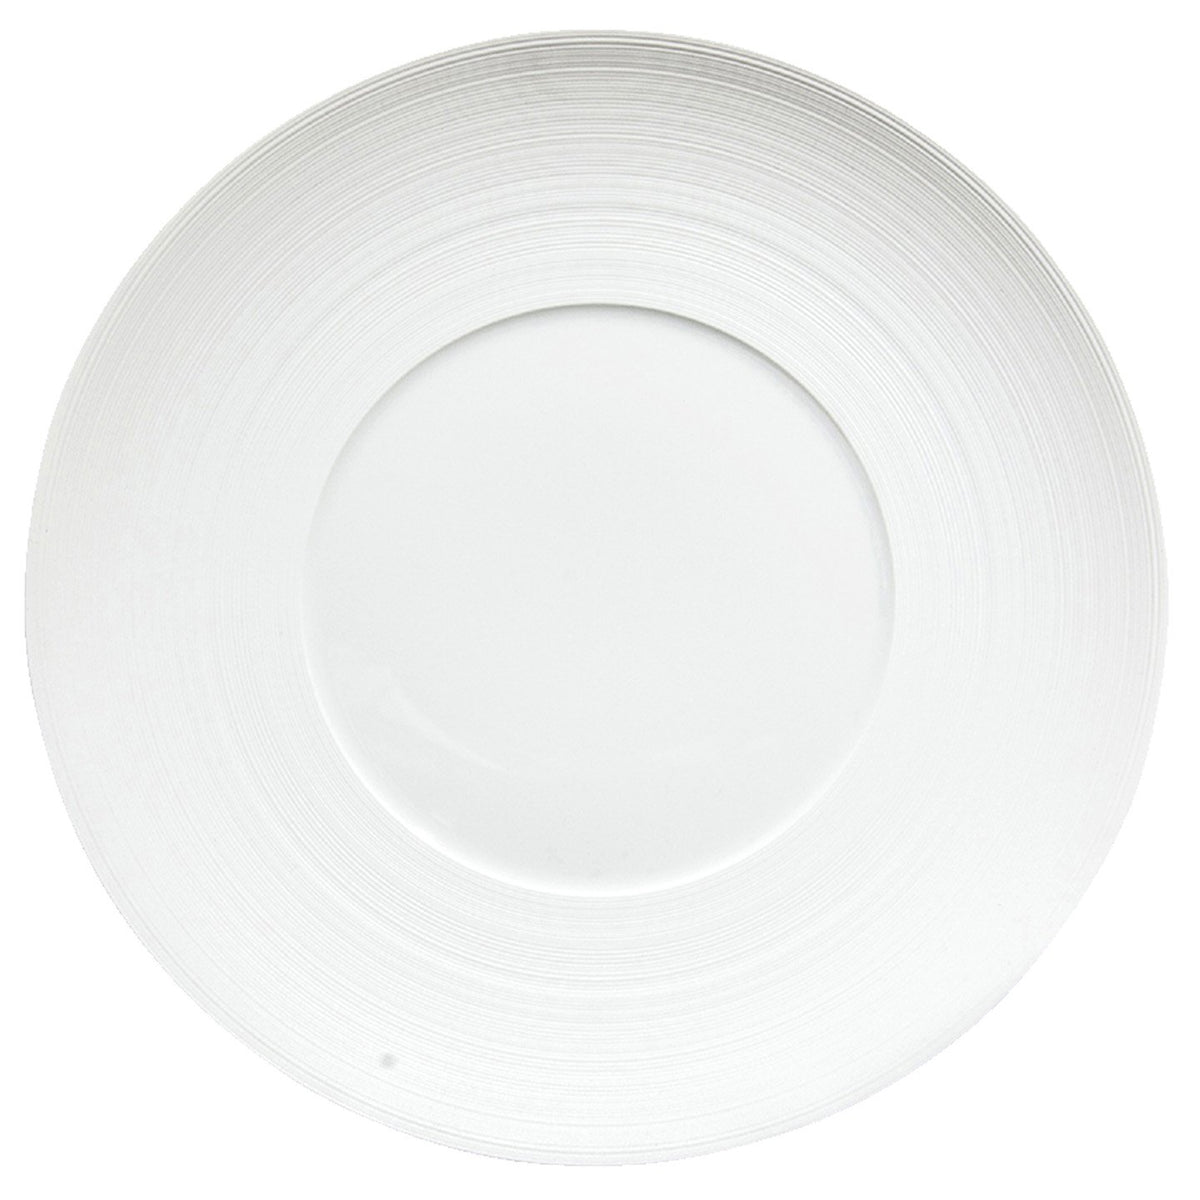 Hemisphere Charger Plate - White